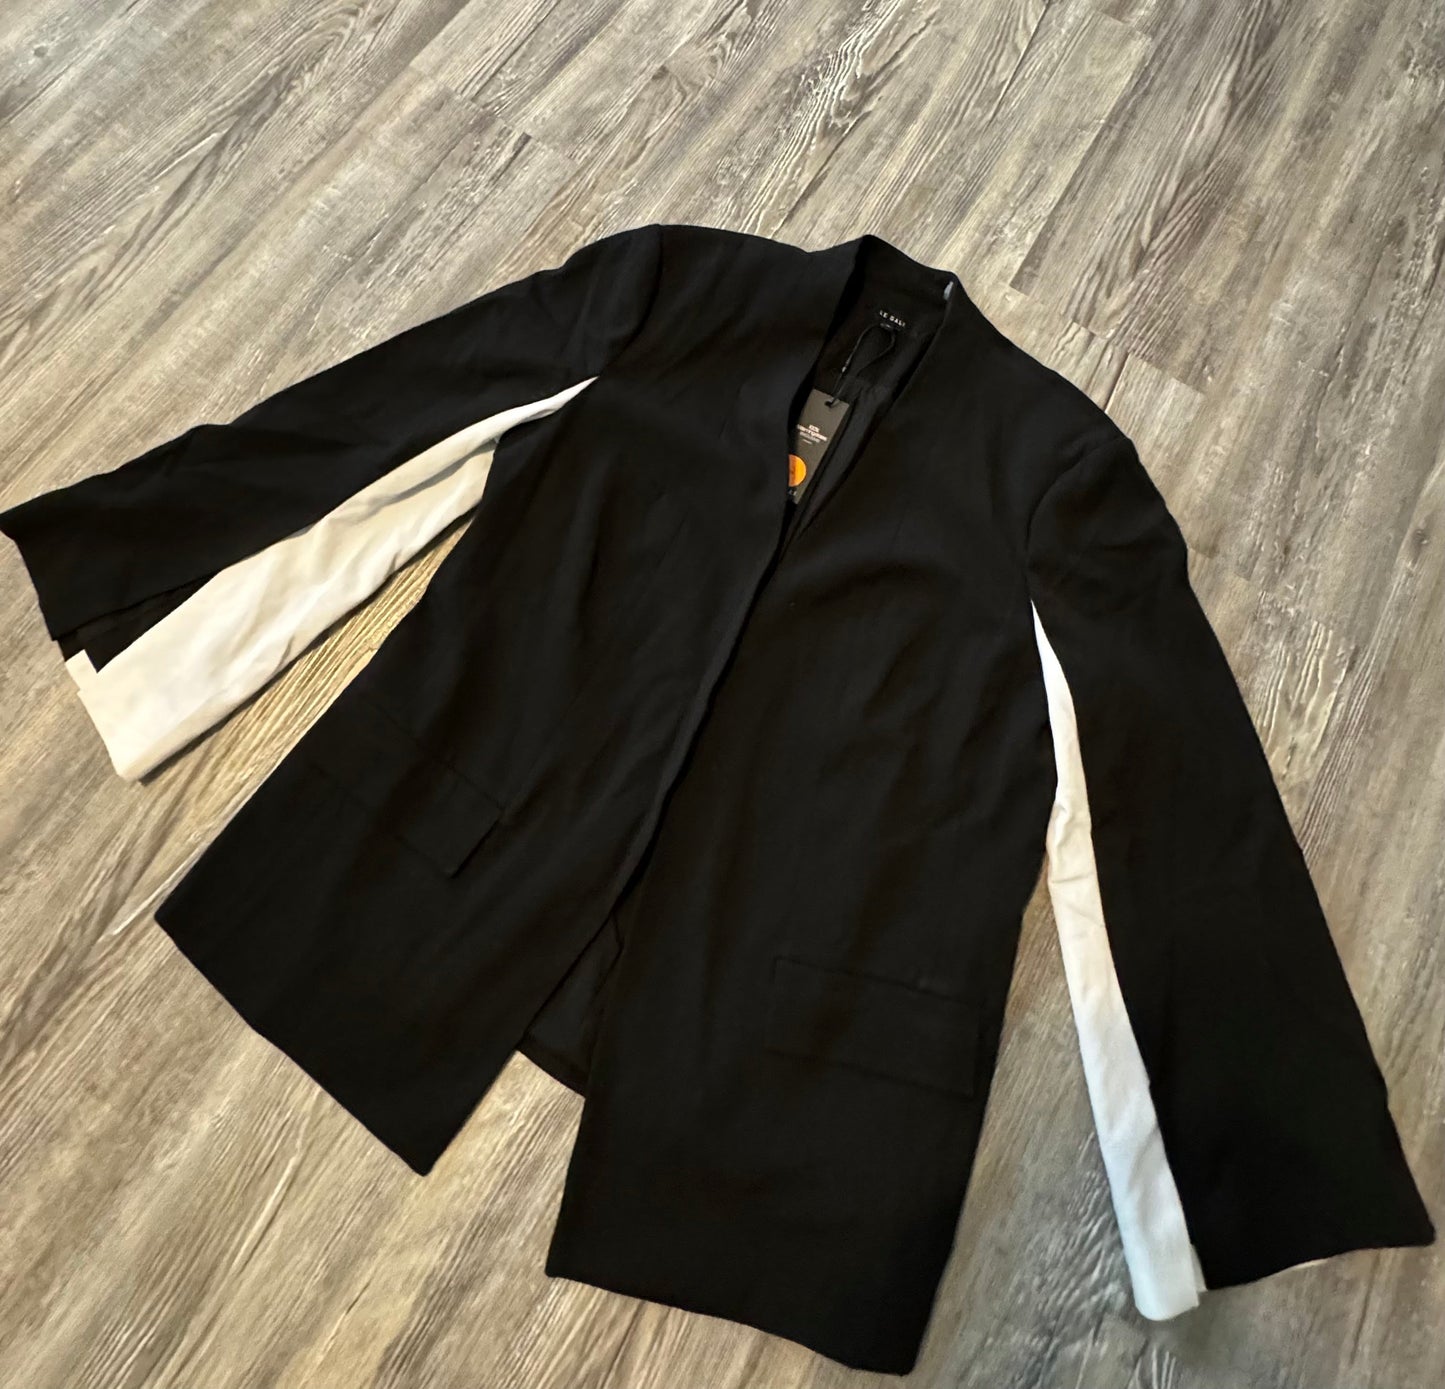 Blazer By Clothes Mentor  Size: M